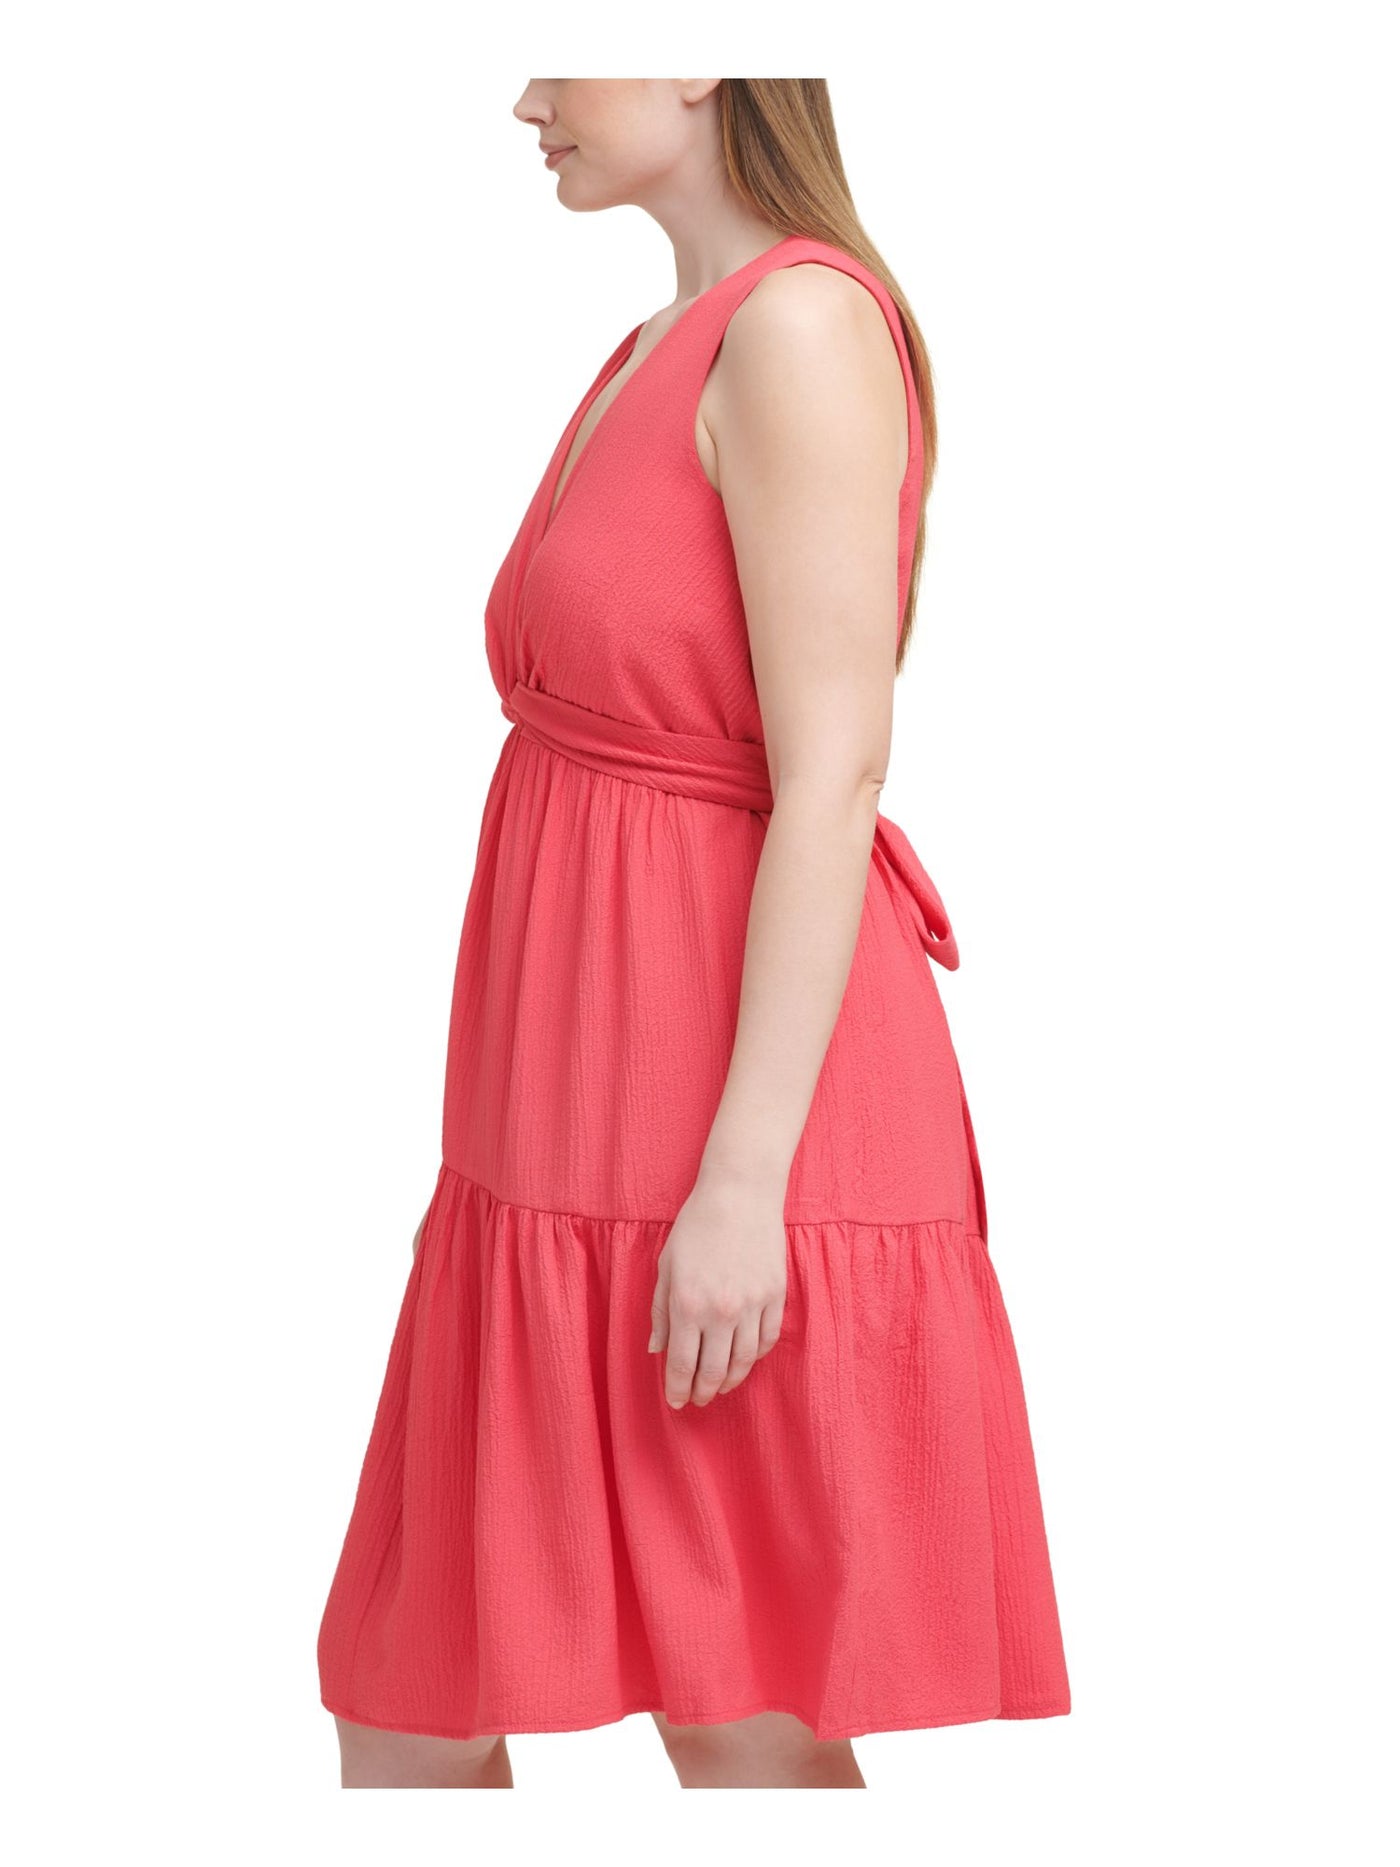 CALVIN KLEIN Womens Coral Stretch Textured Zippered Twist-detail Back Tie Belt Sleeveless V Neck Above The Knee Wear To Work Fit + Flare Dress Plus 14W